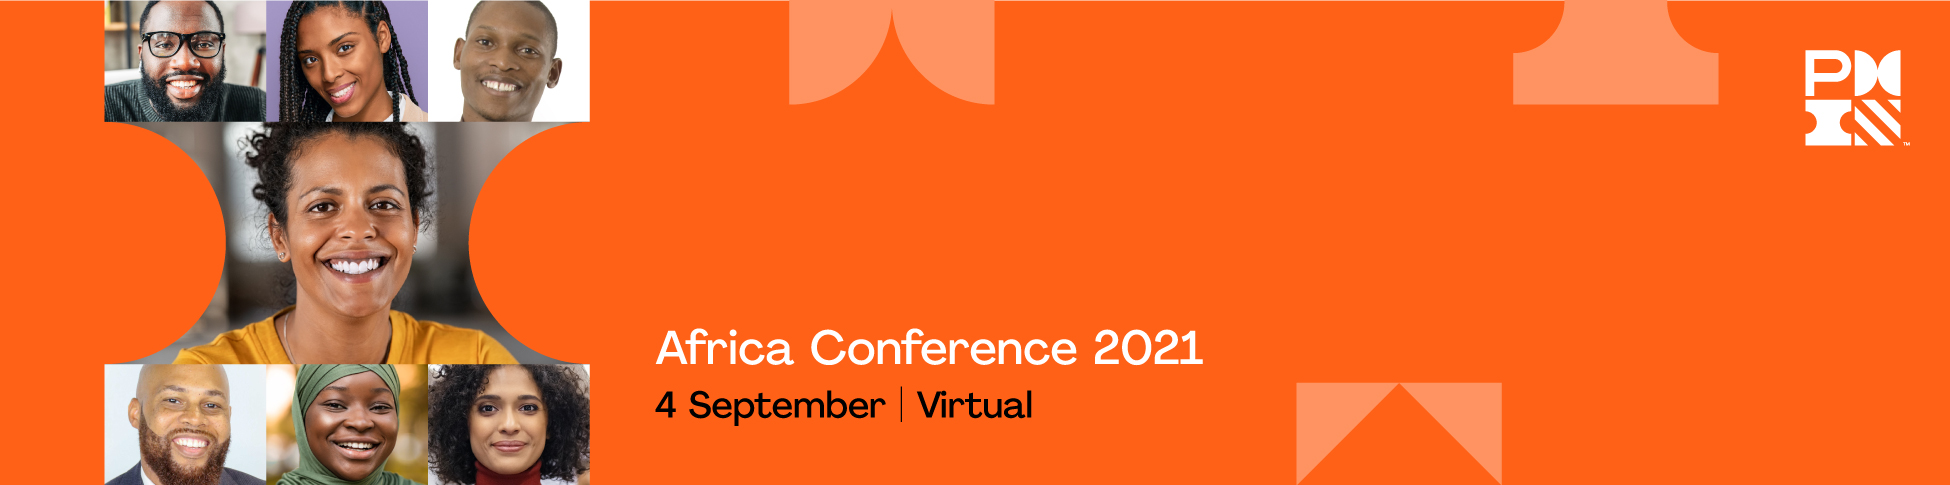 PMI Virtual Africa Conference 2021